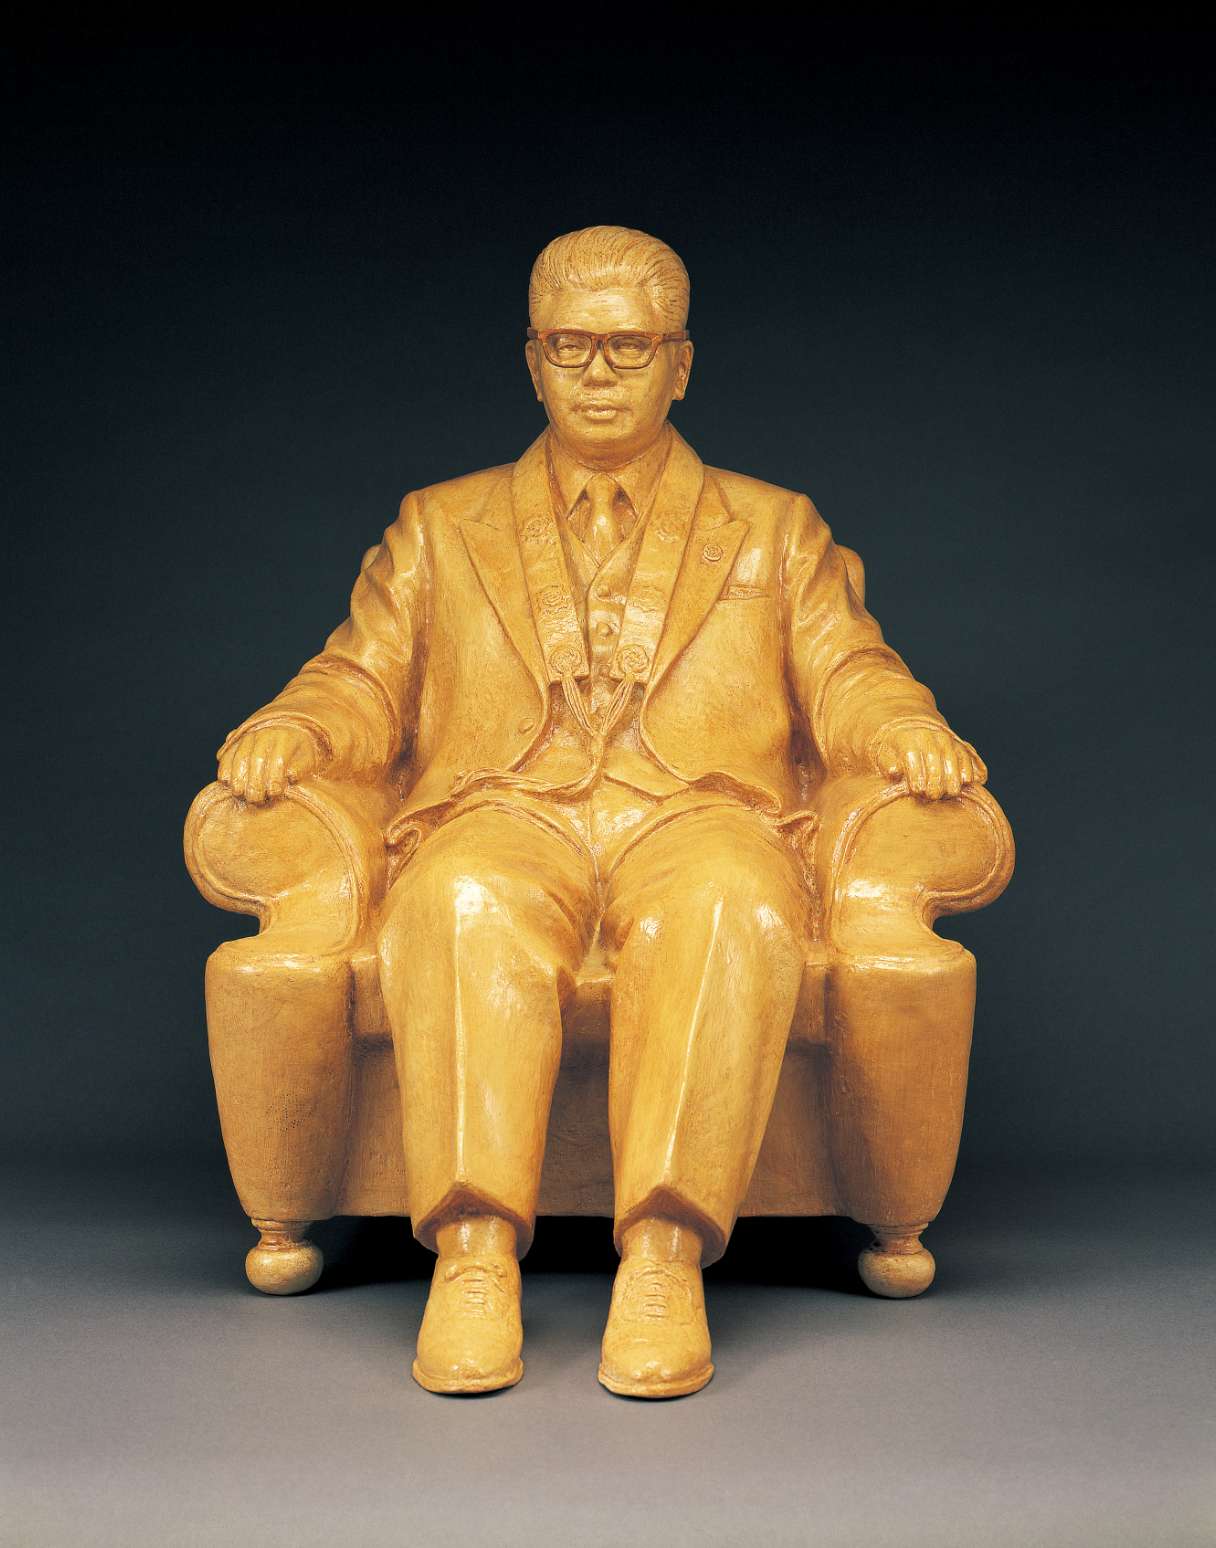 An ochre hued statue of a spectacled, mustachioed middle-aged Japanese man in suit and tie, full head of hair, seated in an upholstered chair, his arms resting on the armrests, feet flat on the floor.